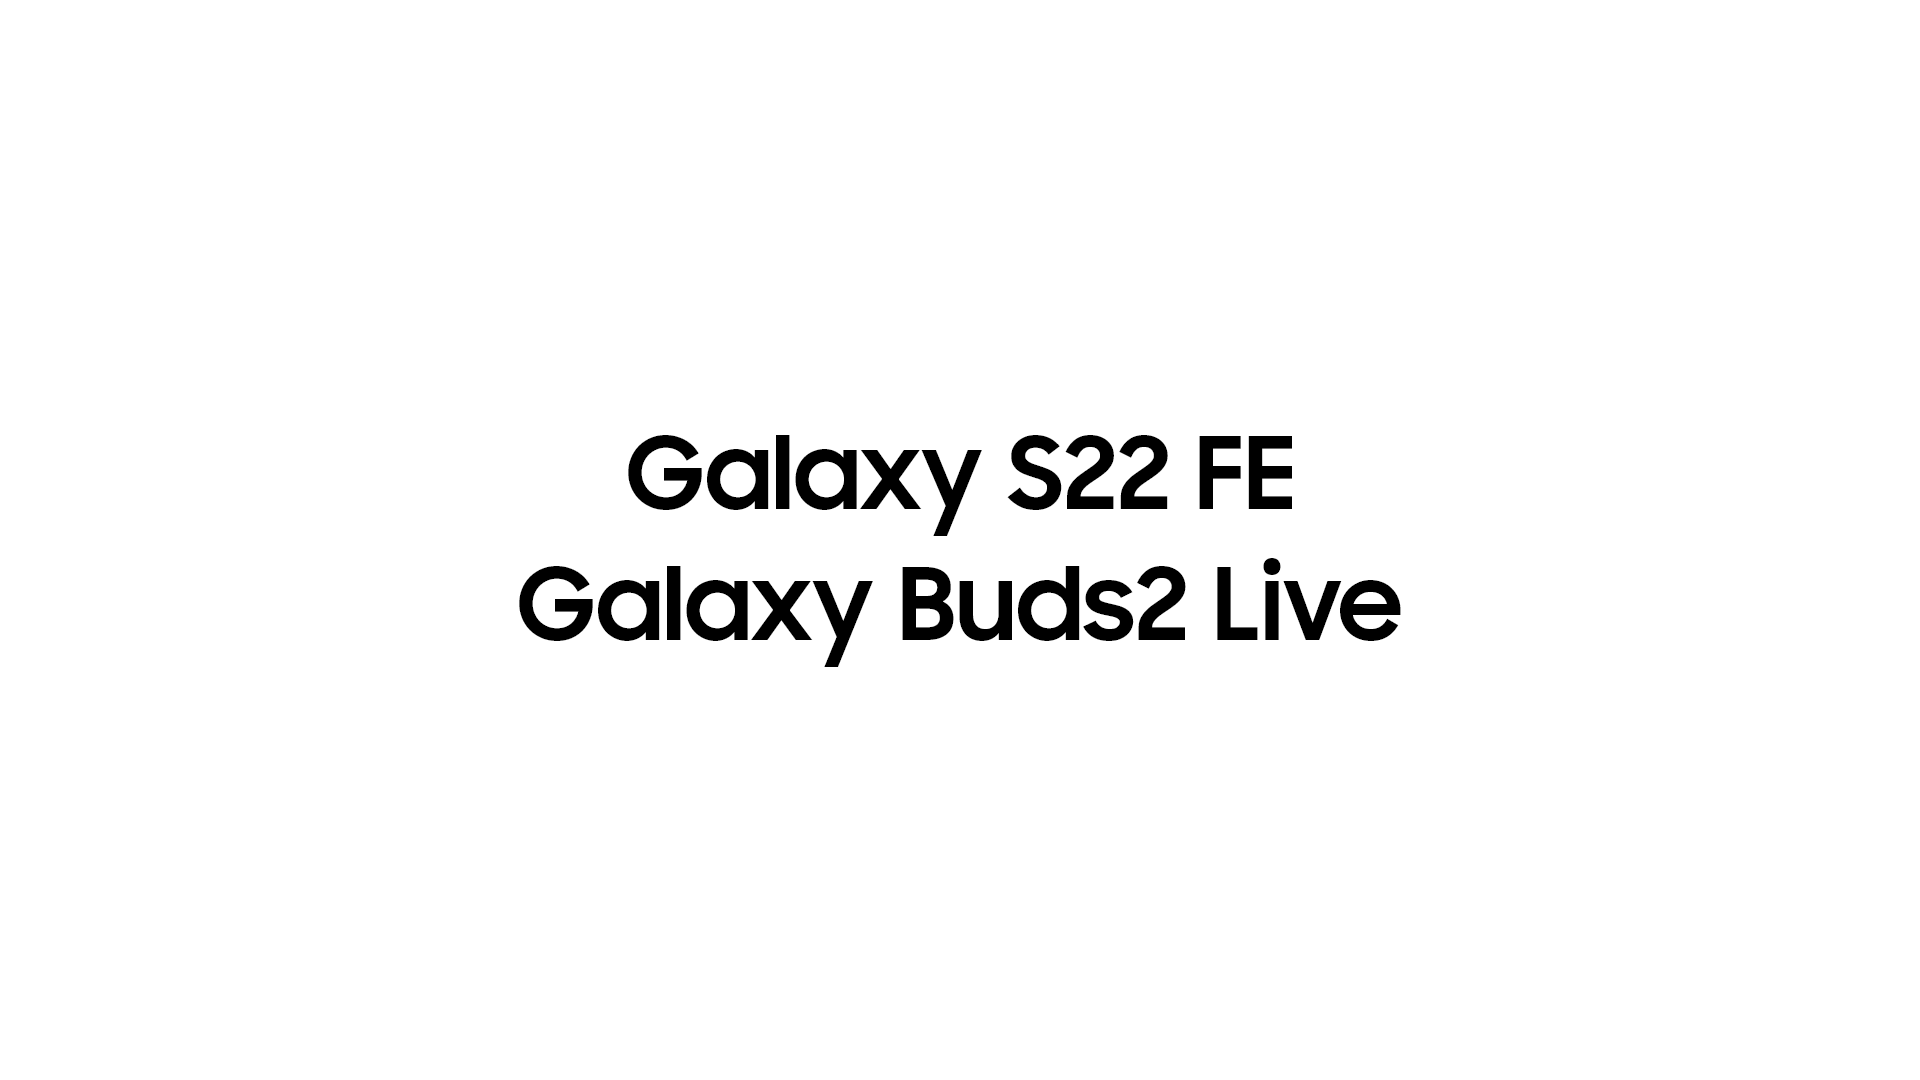 The new Galaxy Buds Live are expected to join the alleged Galaxy S22 FE at the launch event this spring.  - Samsung's best kept secret!  Cheaper flagship phone than Galaxy S23 to steal the show soon?